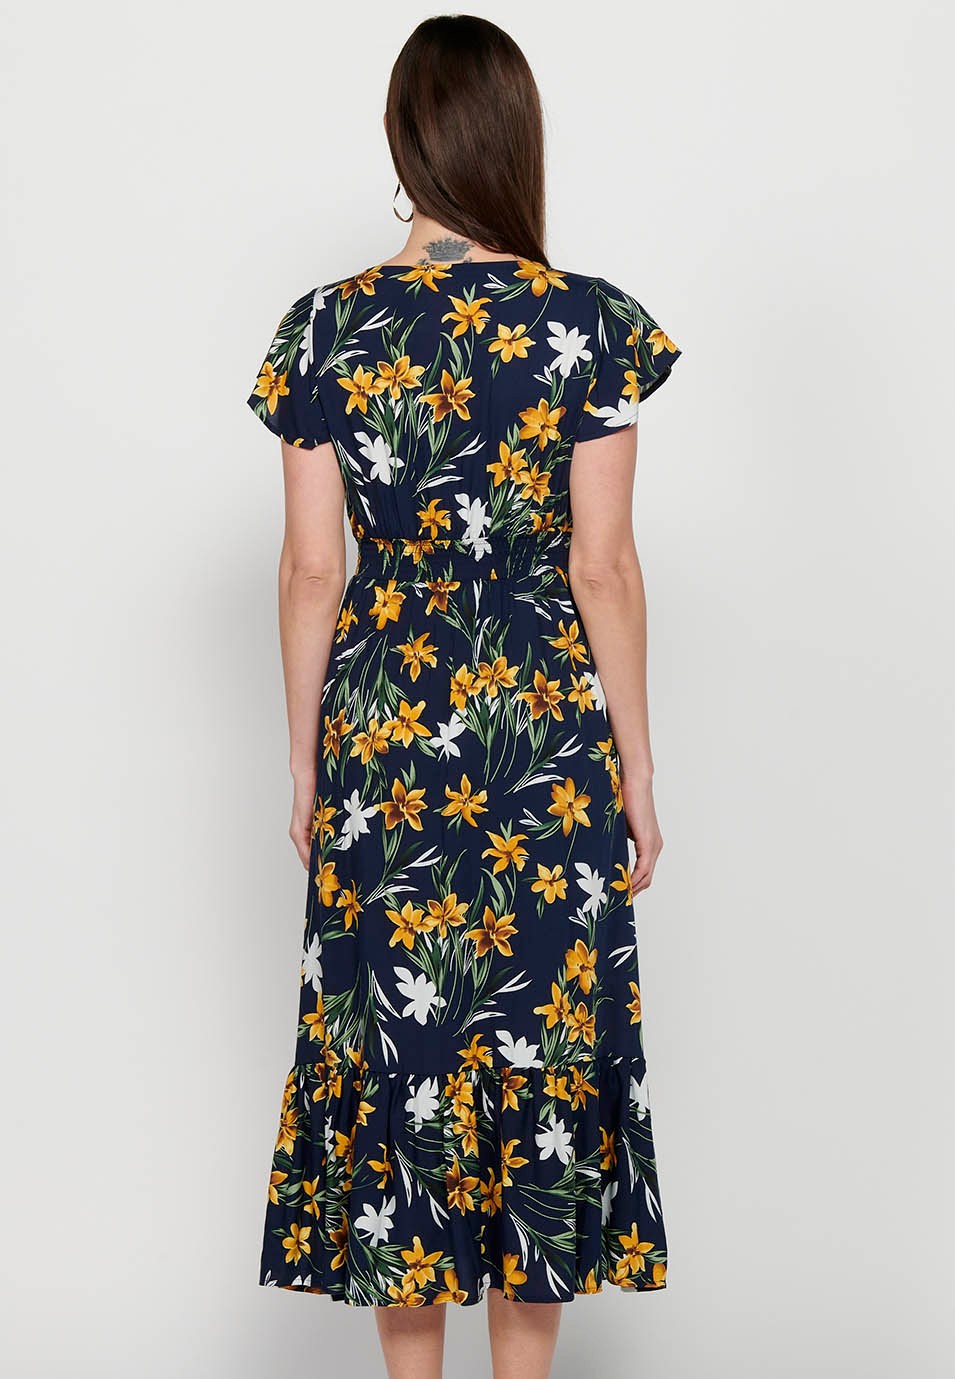 Long short-sleeved dress with V-neck and floral print in Navy for Women 6